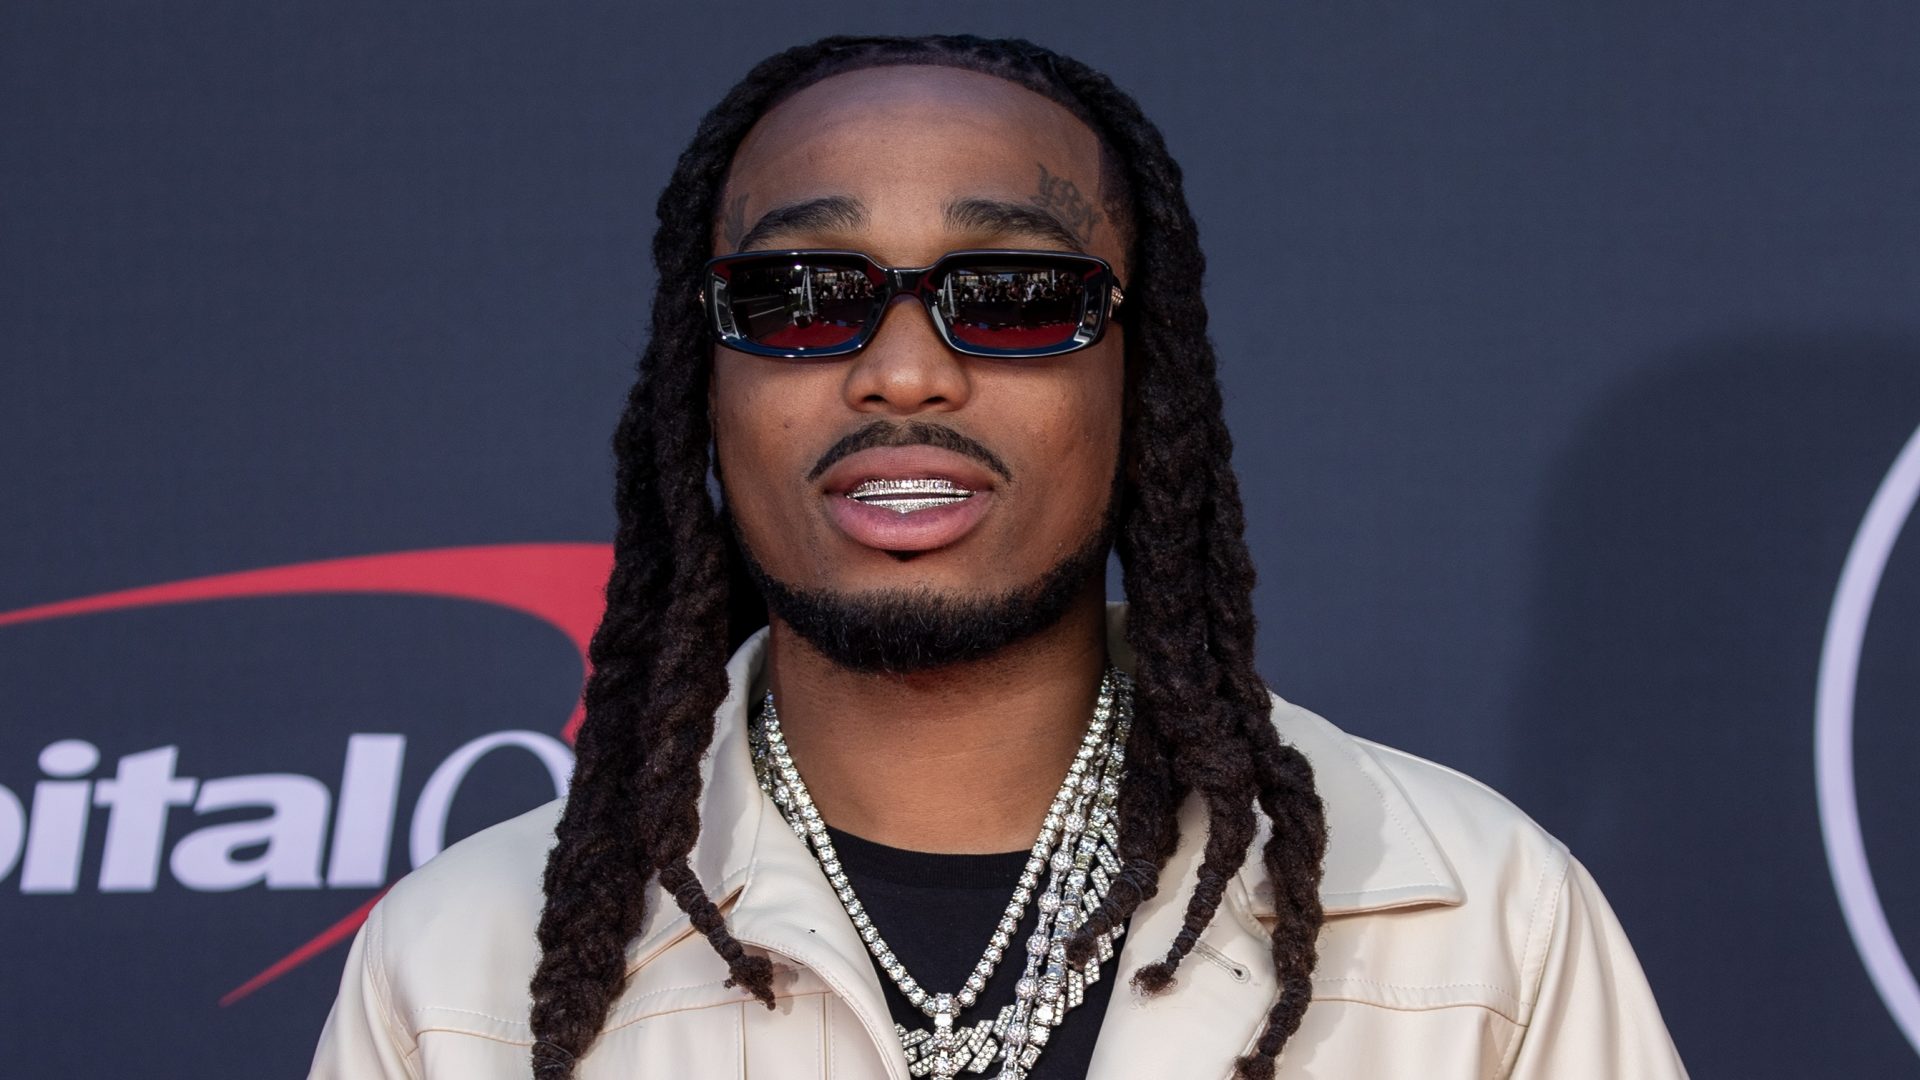 Who Is Erica Fontaine? The Gymnast Quavo Was Spotted With At Usher's Concert (Video)